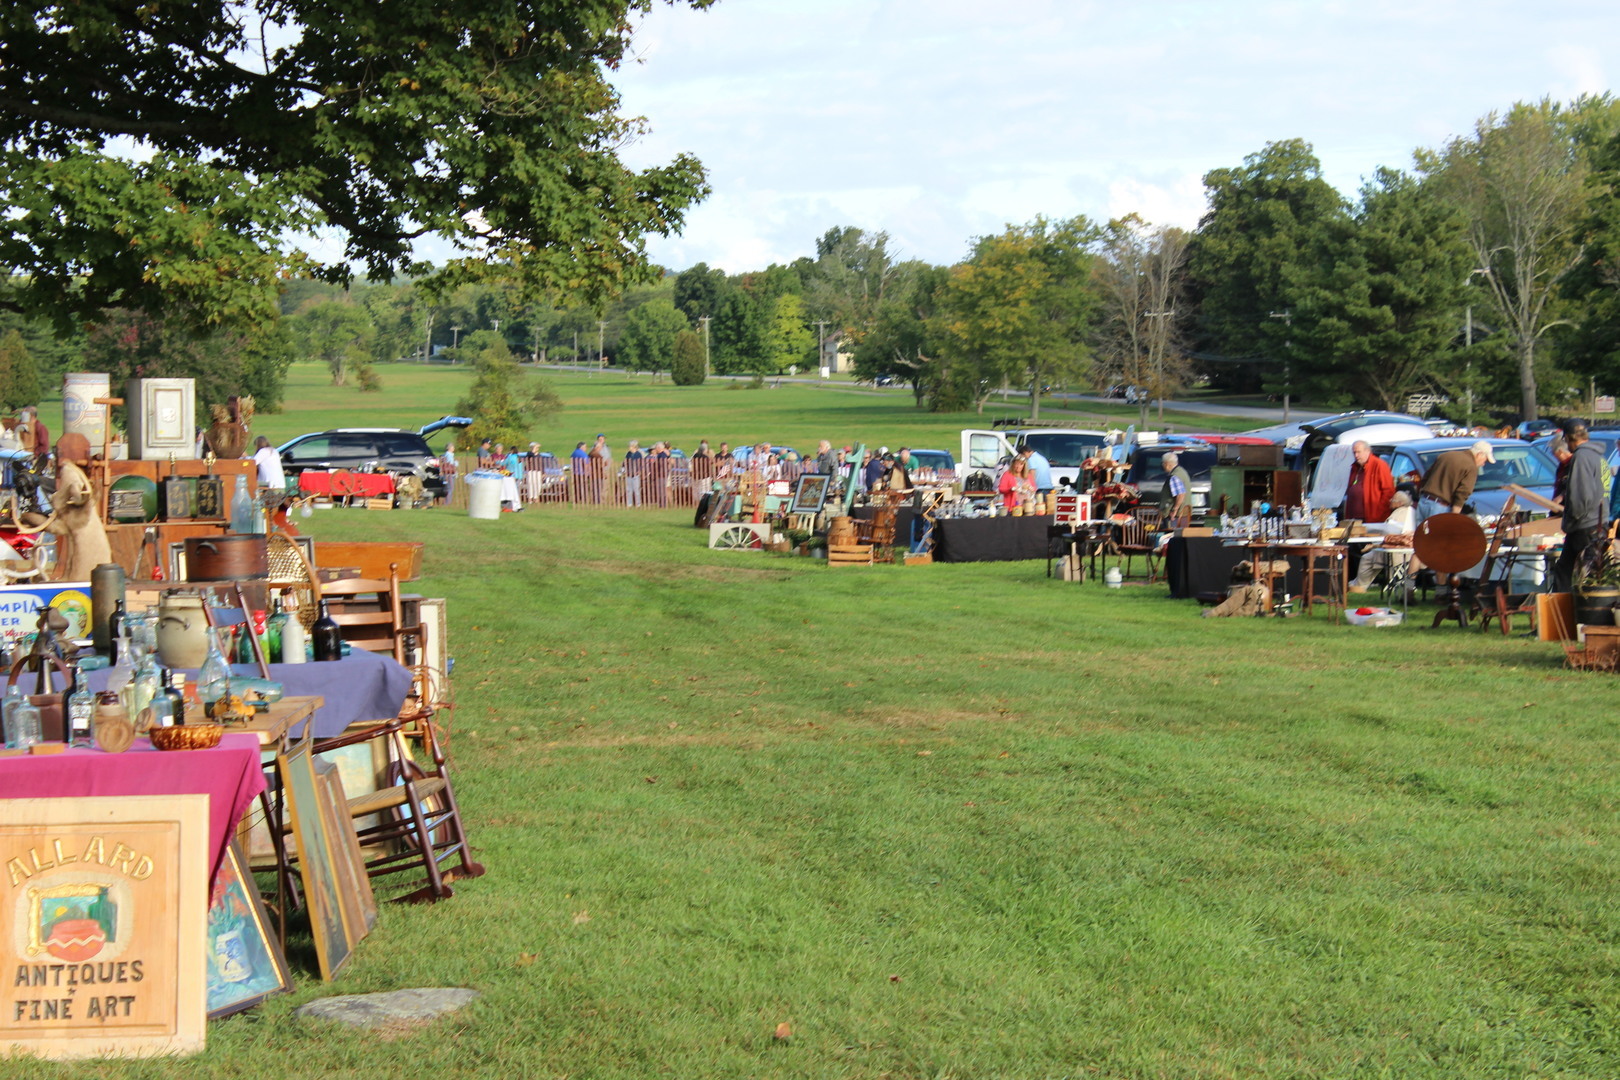 54th Annual Antique Show on the Lebanon Green, Lebanon, Connecticut, United States